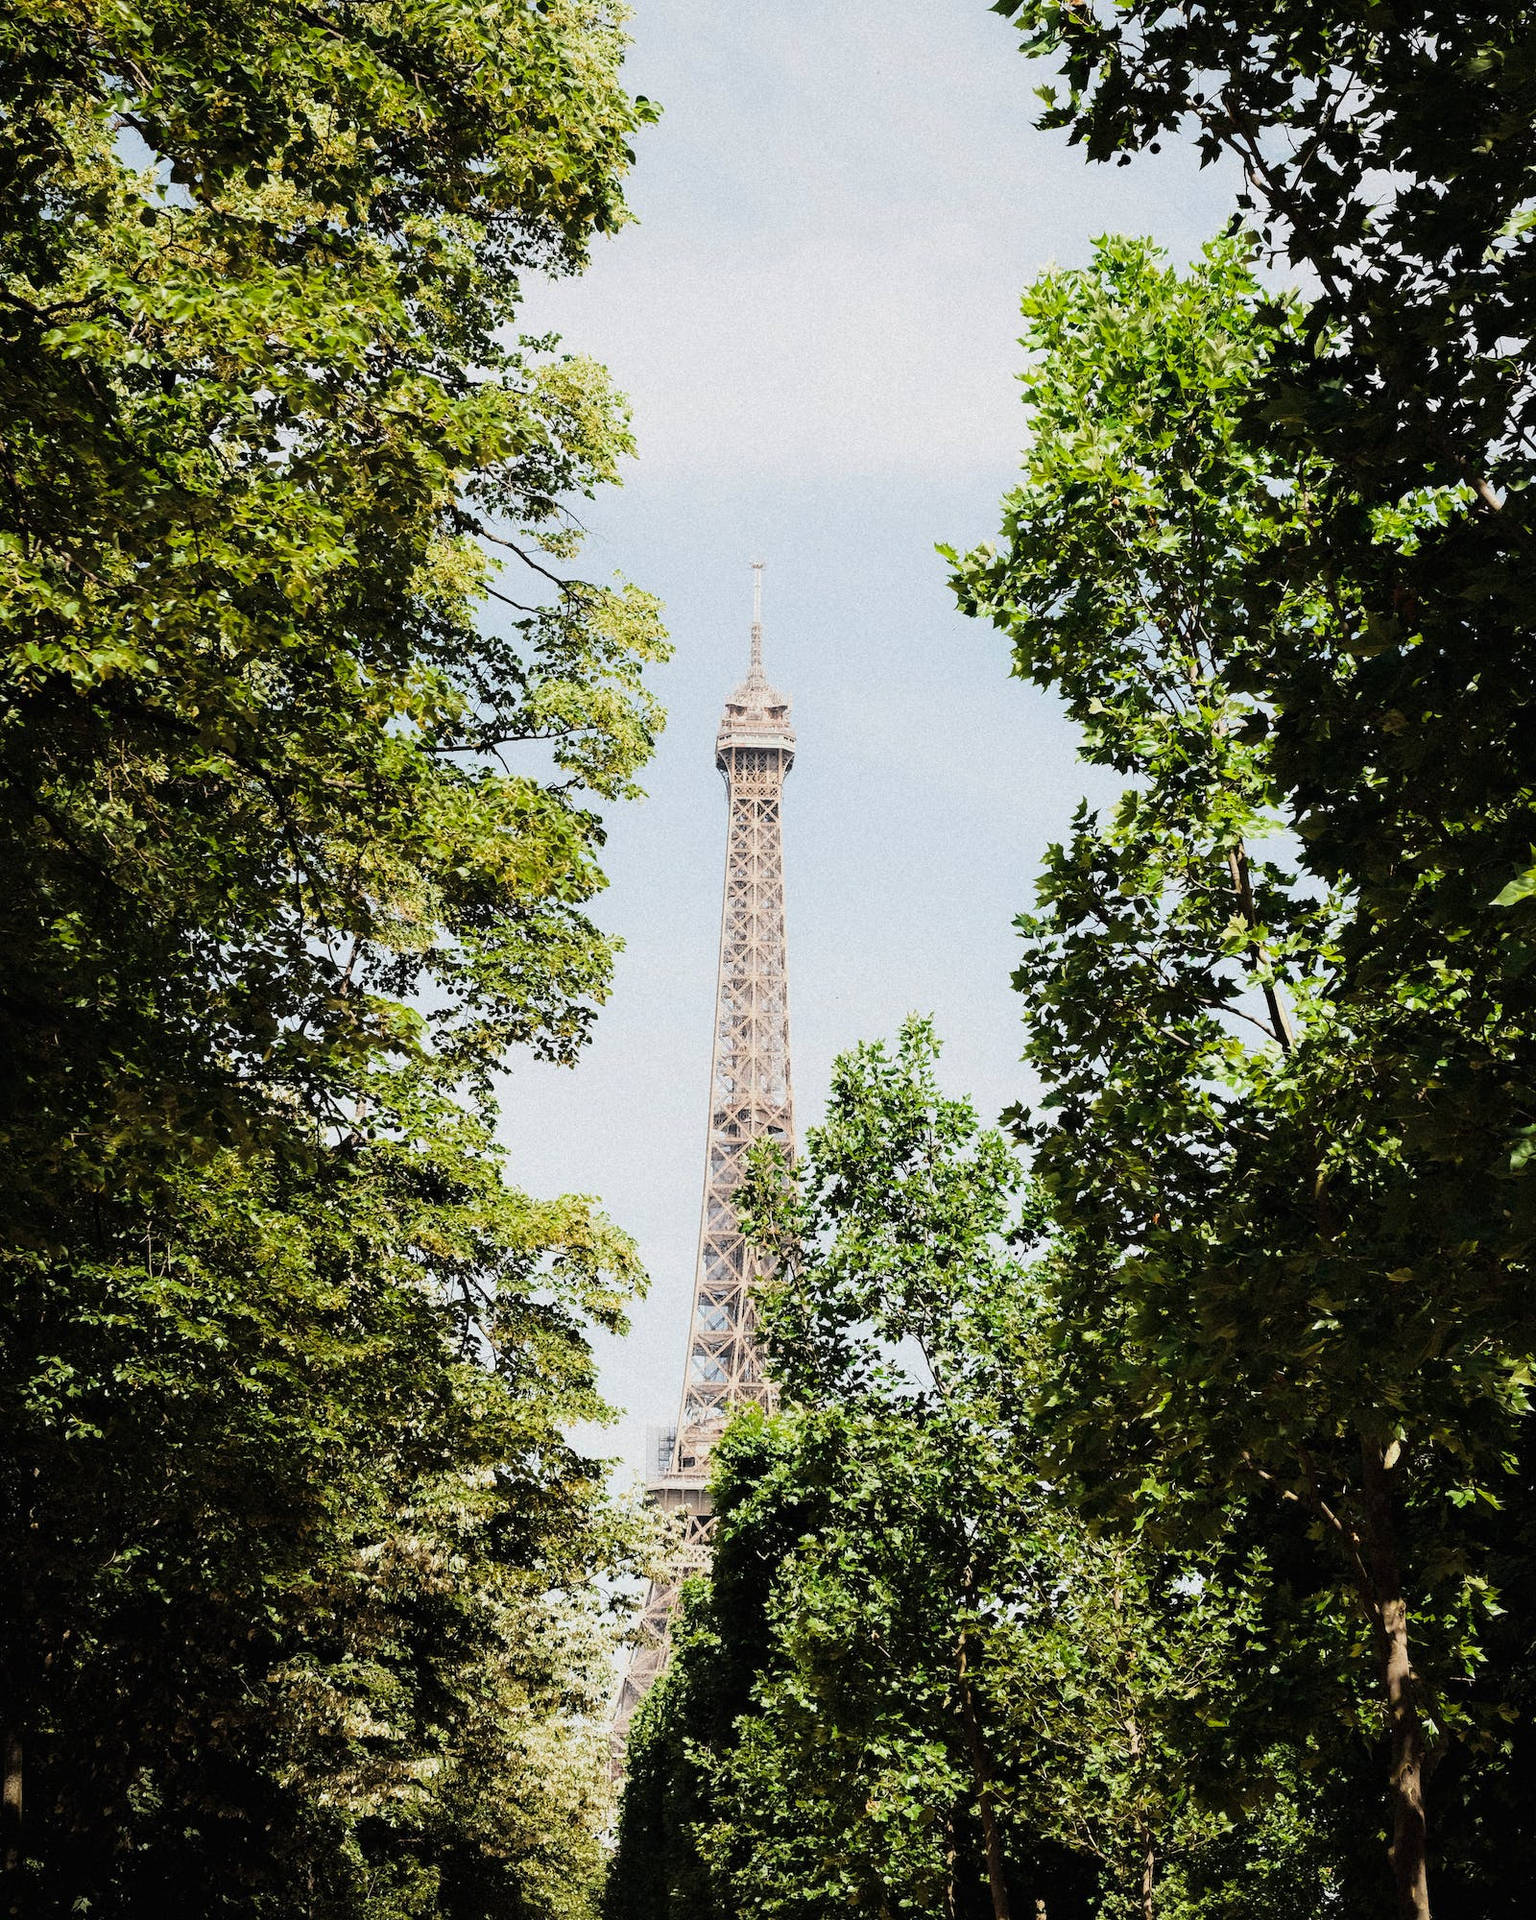 Distant Eiffel Tower In France Iphone Background